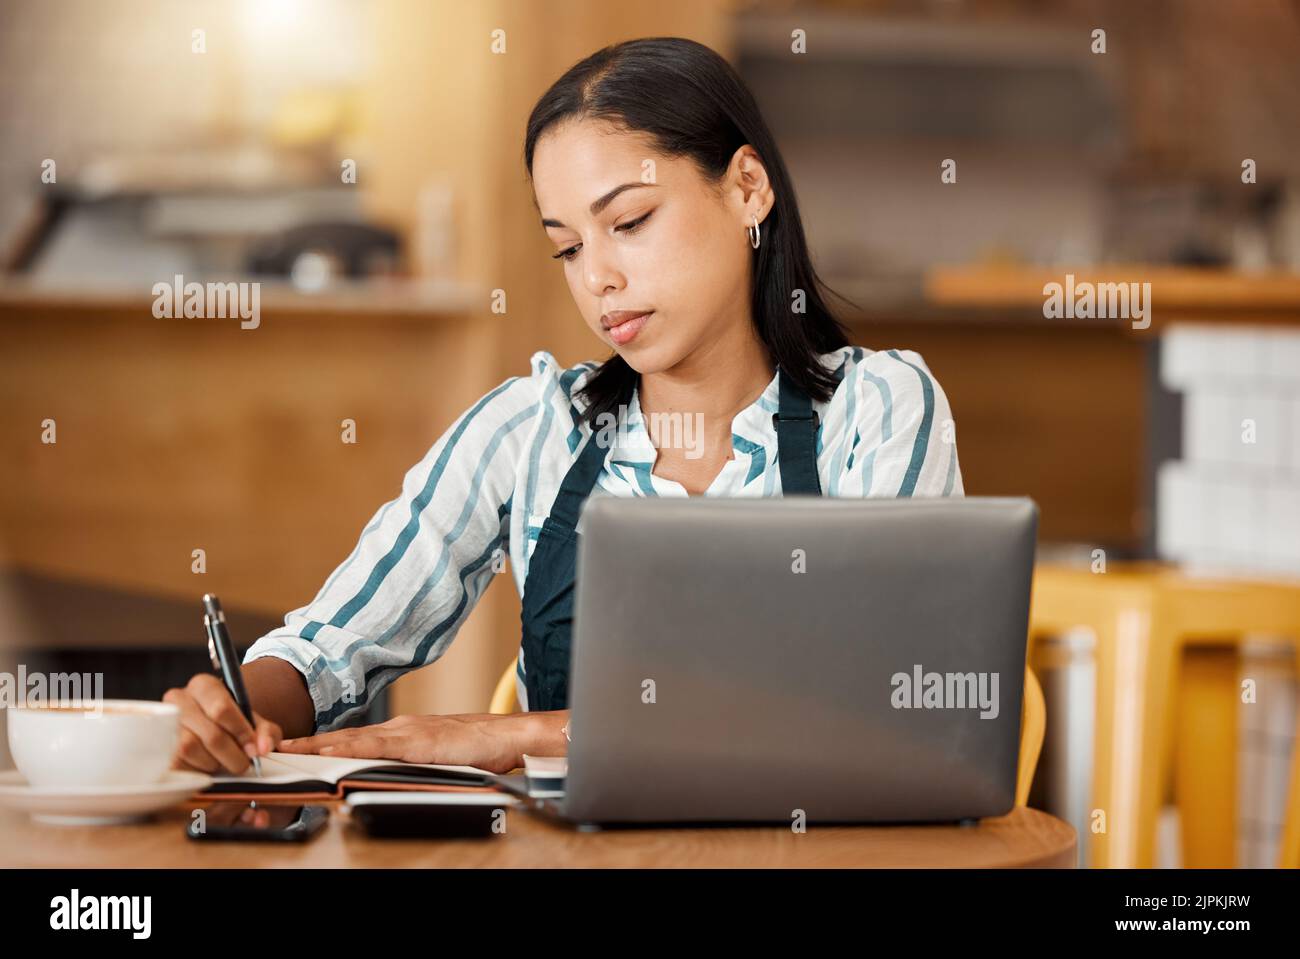 Cafe owner, coffee shop manager or small business entrepreneur writing notes and working on a laptop in her startup. Young female looking serious Stock Photo